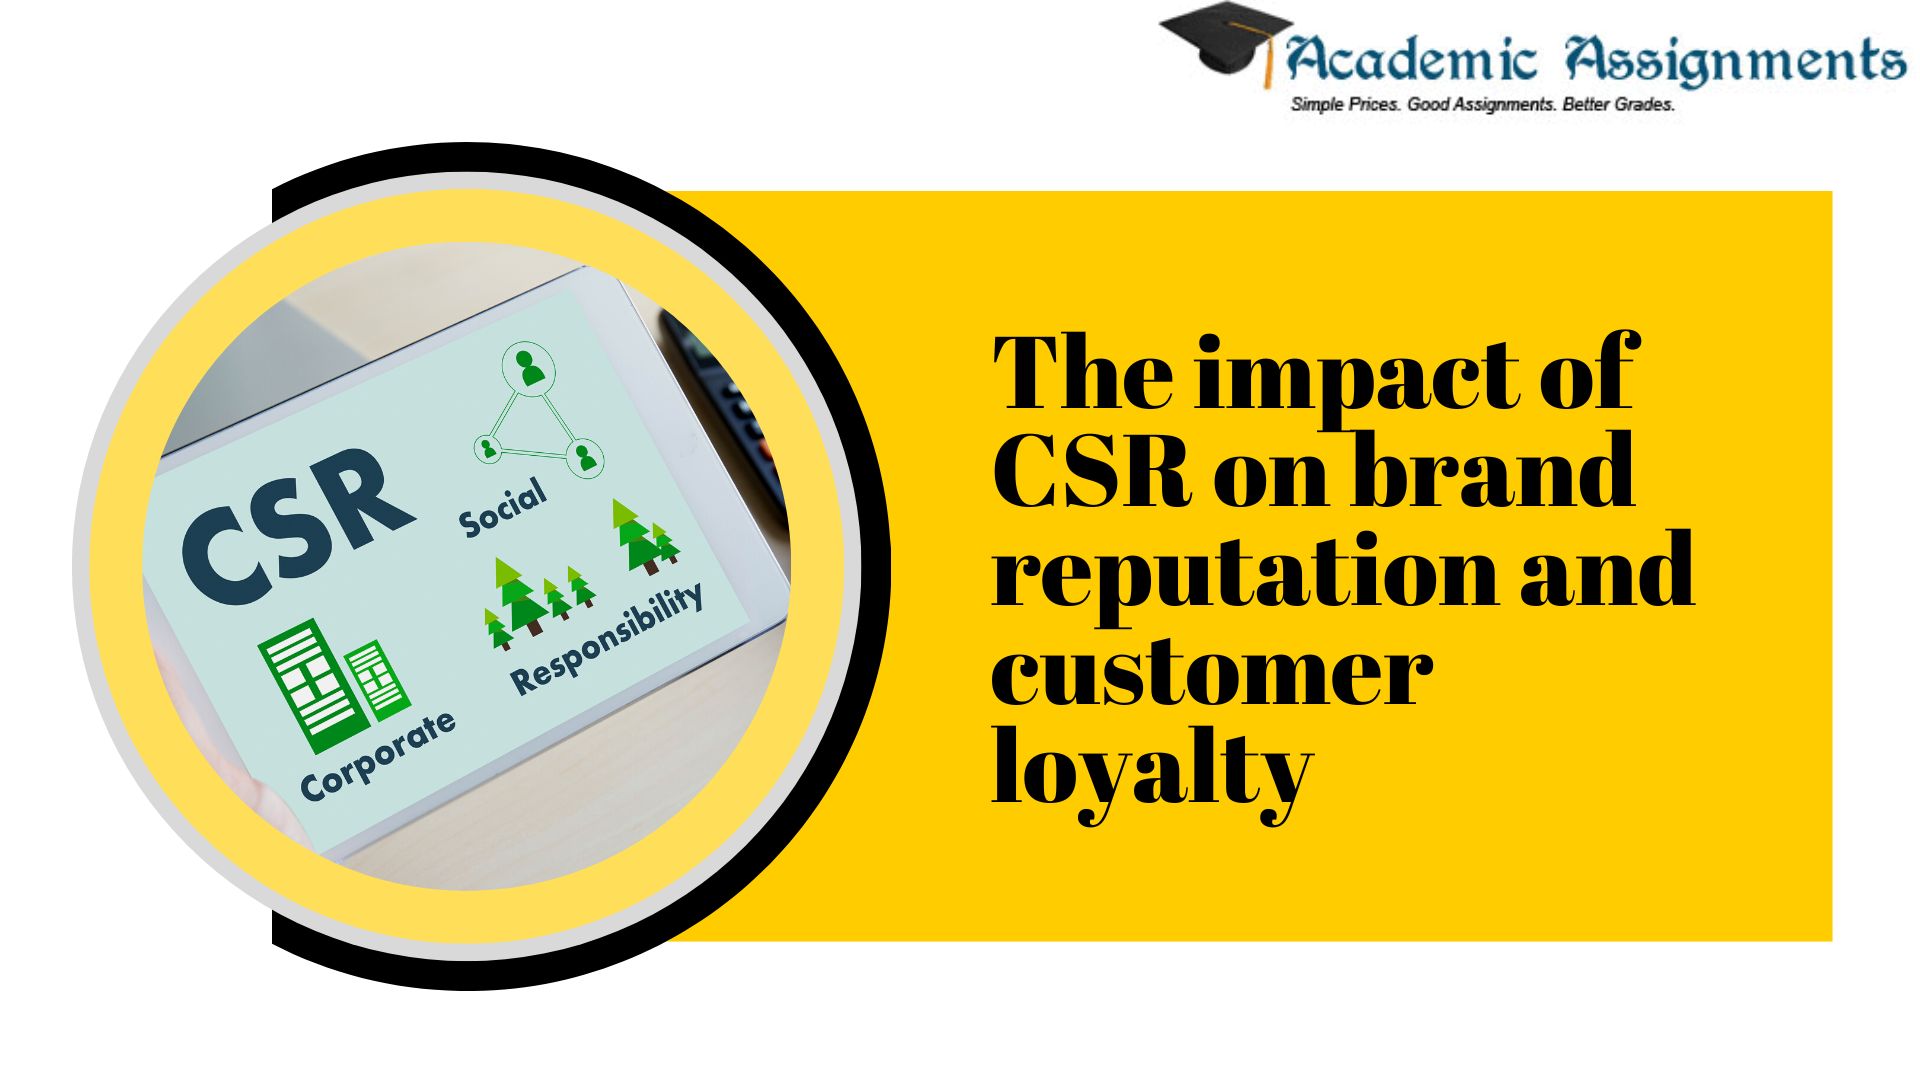 The impact of CSR on brand reputation and customer loyalty